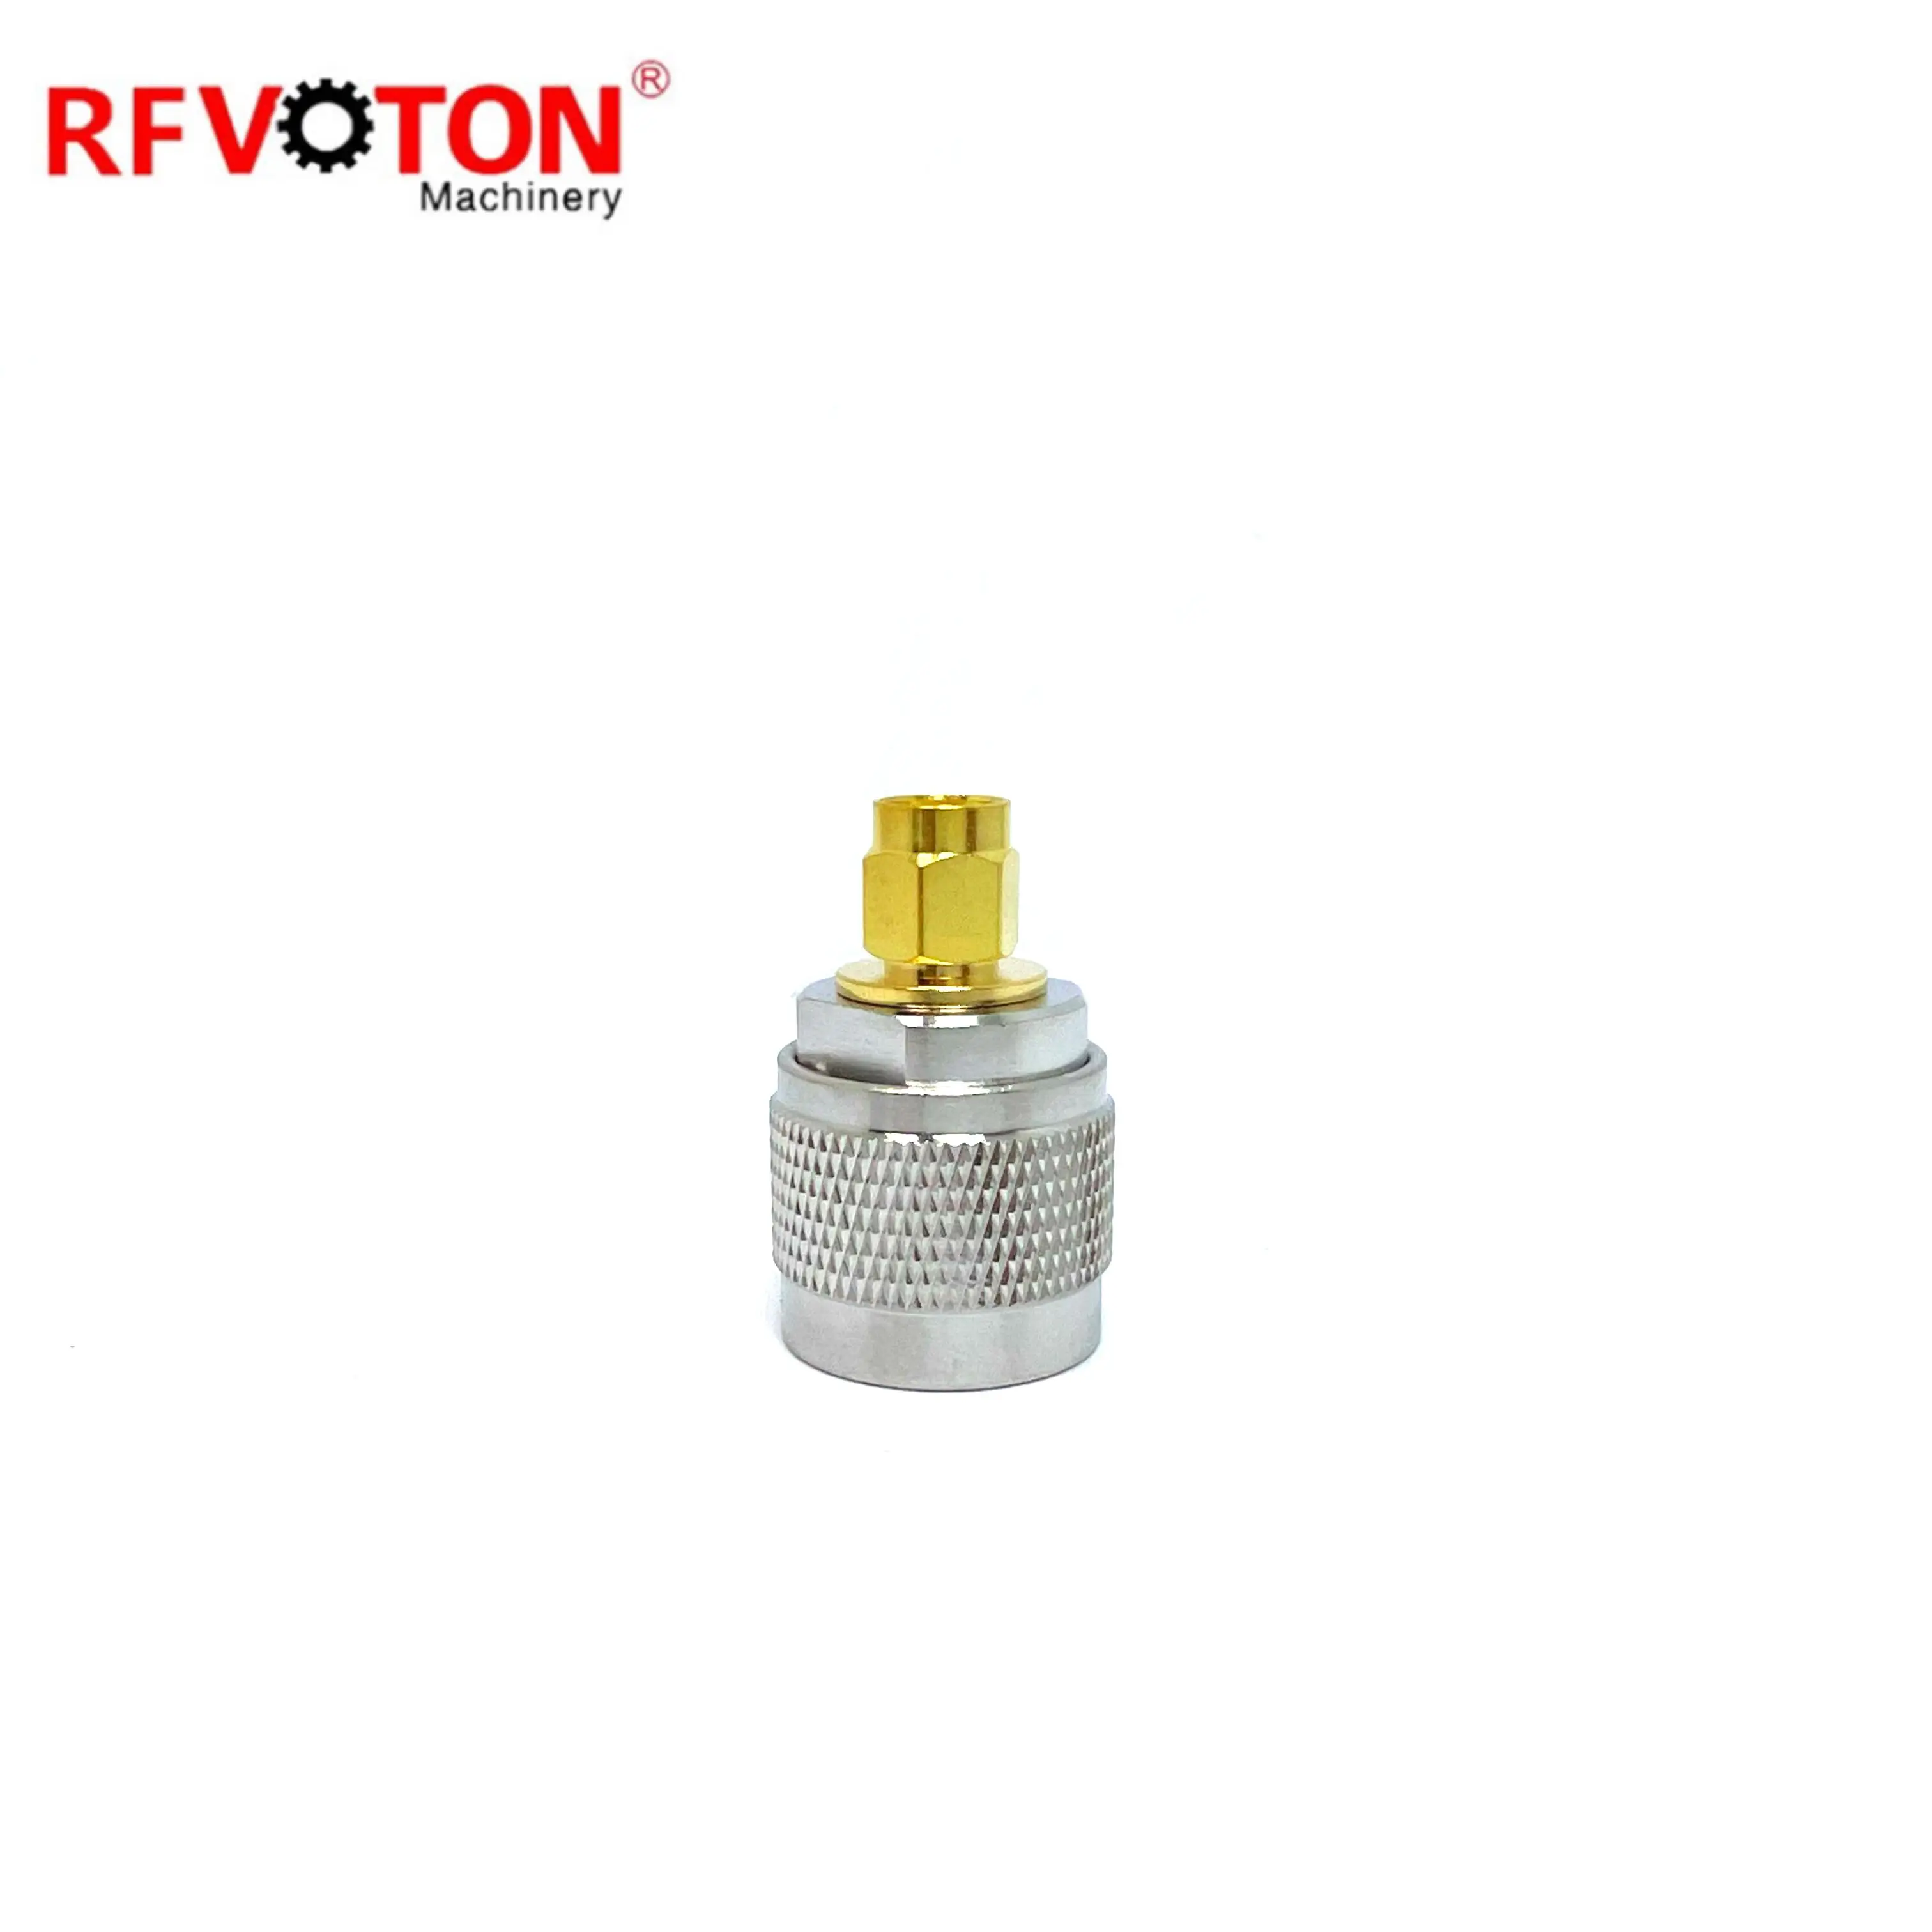 Rf Connector Adaptor Type N N Male Plug to SMA Male Plug Female 50 Ohm RF Coaxial Connector Adapter Test Converter factory